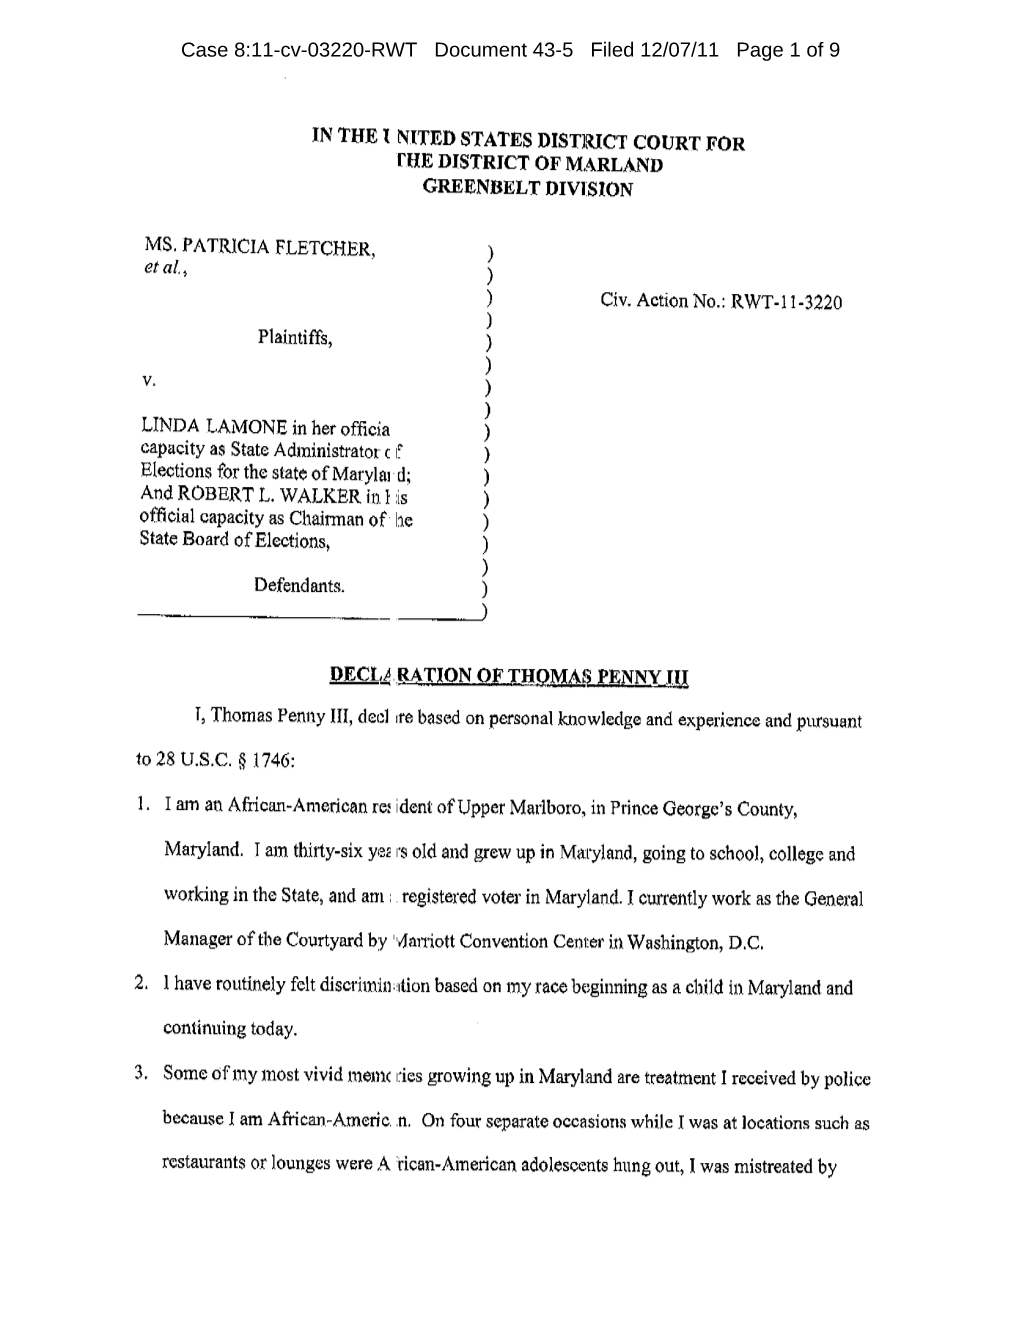 Case 8:11-Cv-03220-RWT Document 43-5 Filed 12/07/11 Page 1 of 9